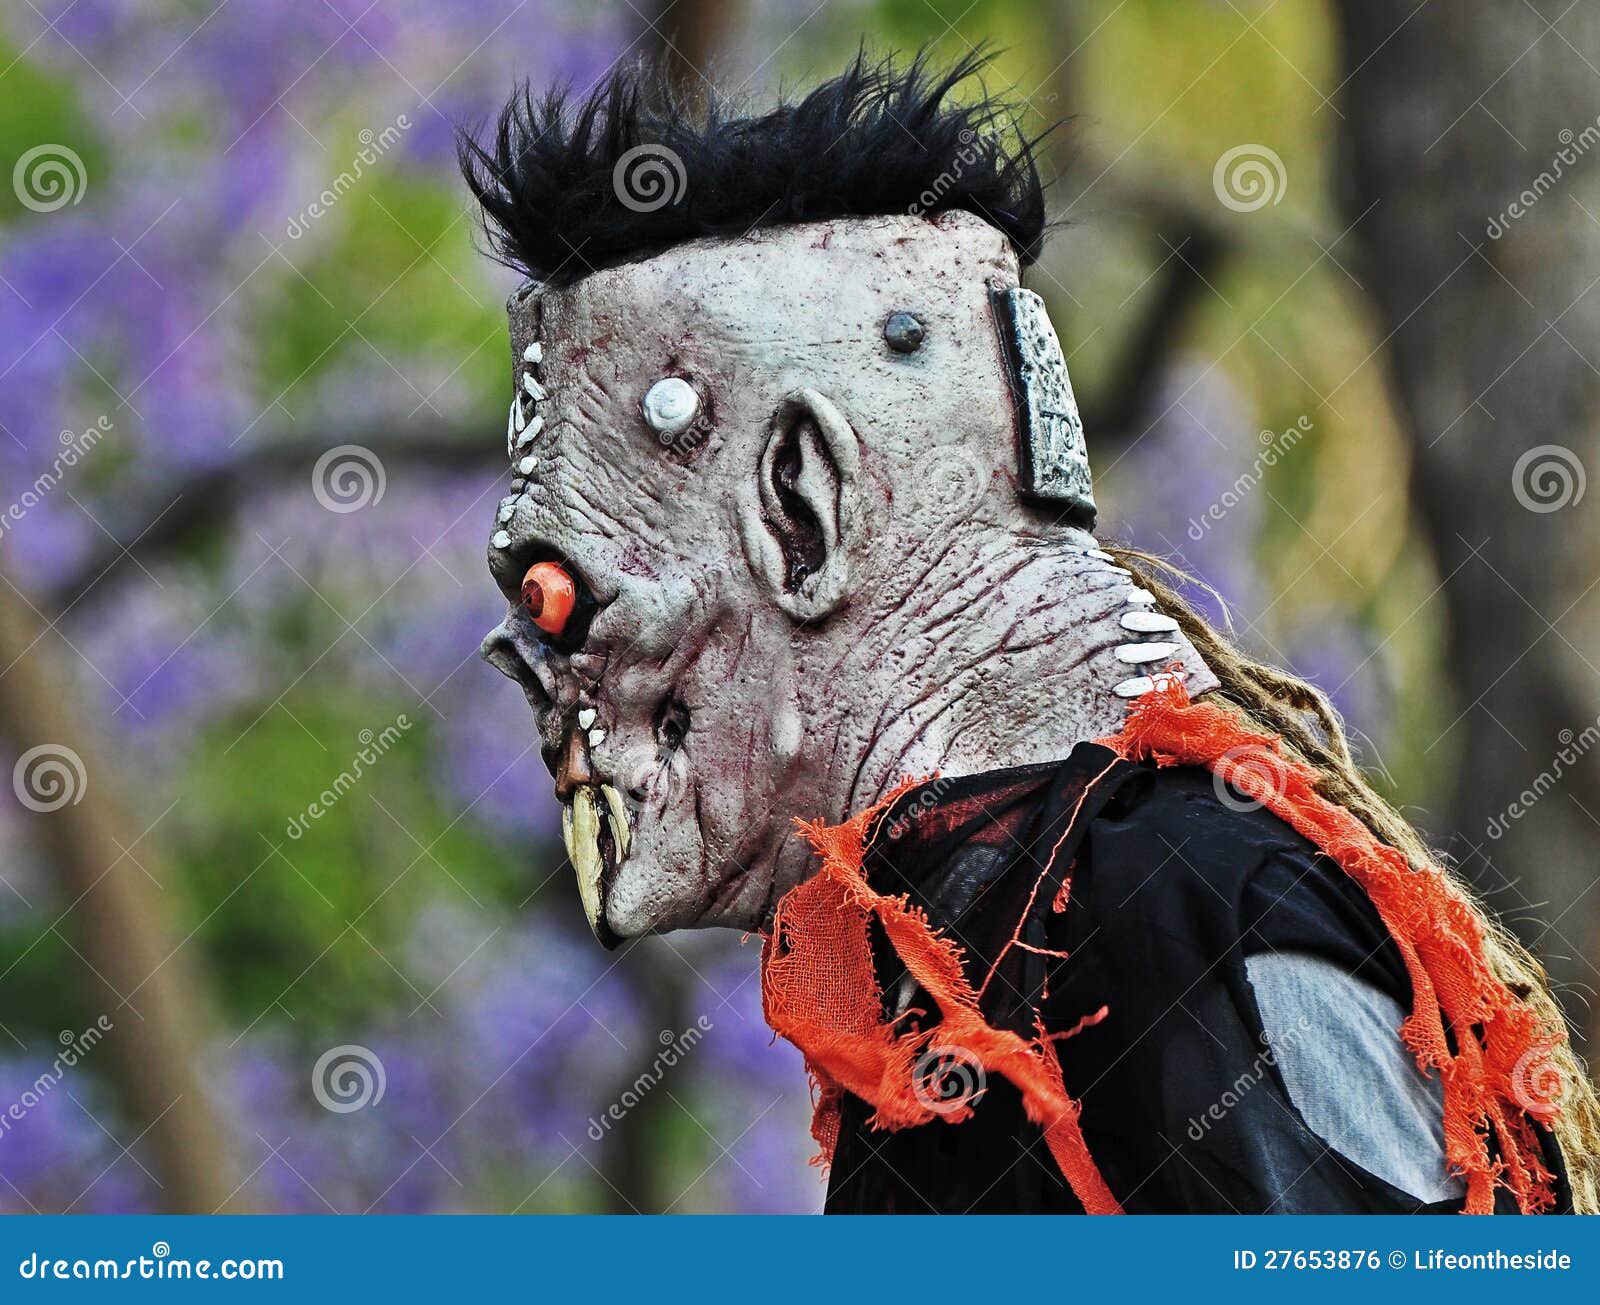 Scary Ghoulish Monster, Man In Mask. Stock Photo - Image of gothic